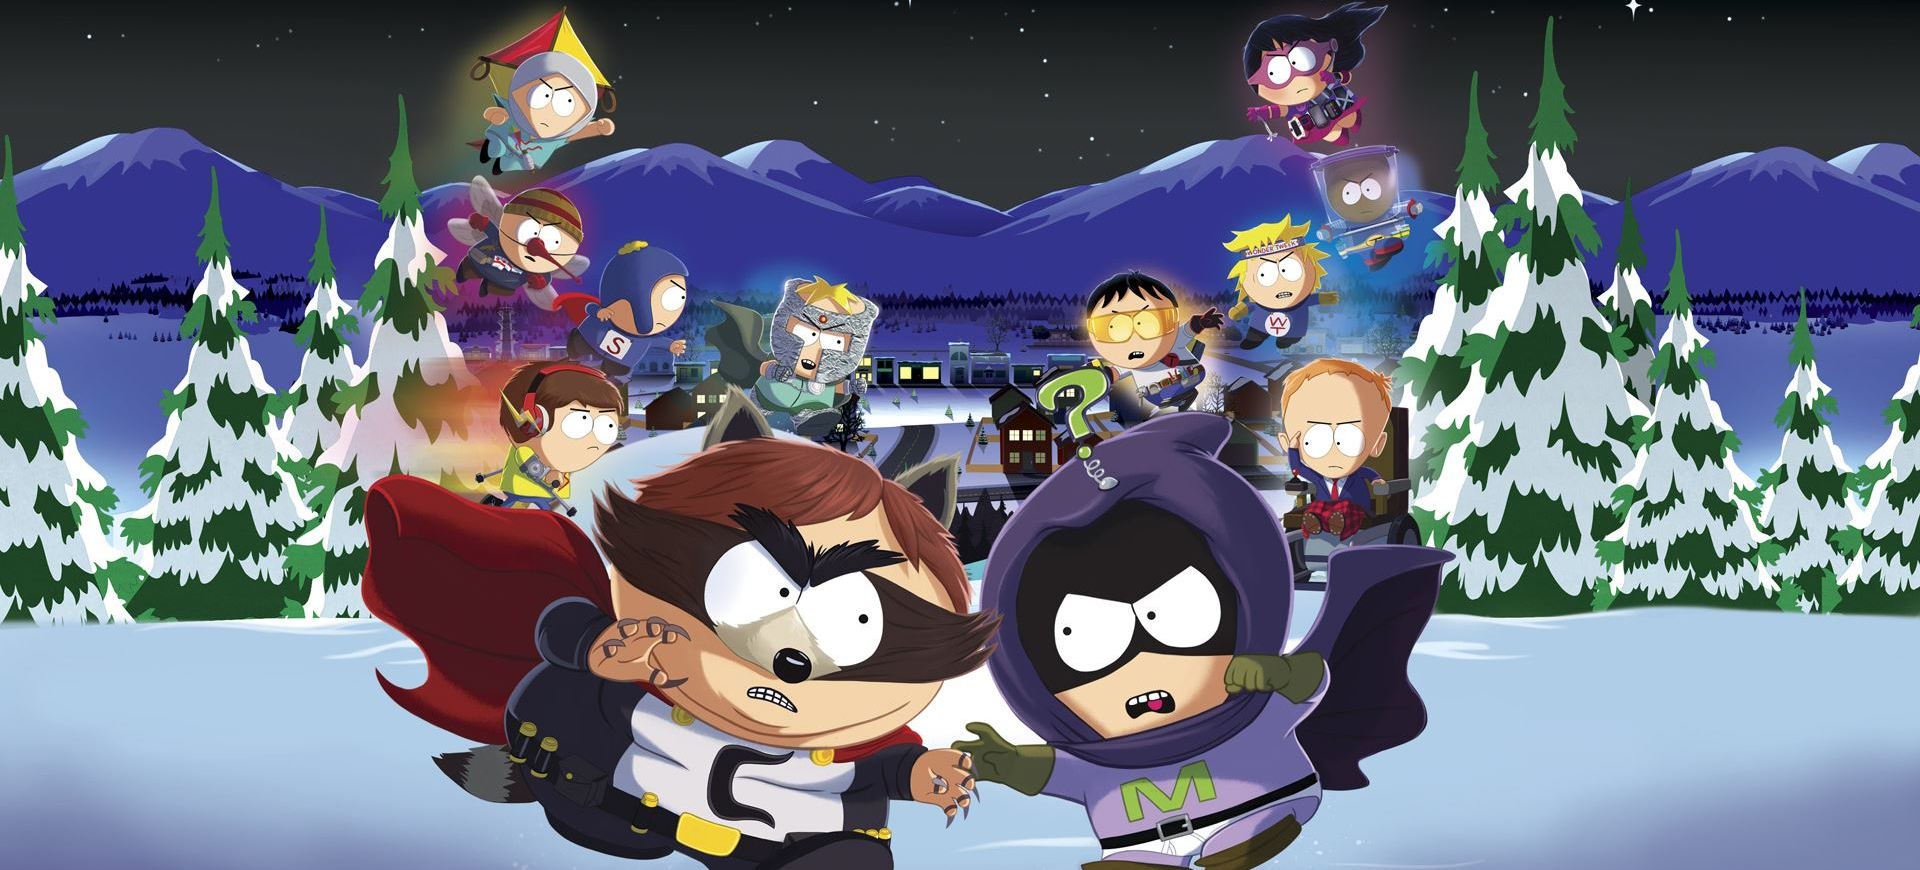 South Park: The Fractured But Whole - Đánh Giá Game